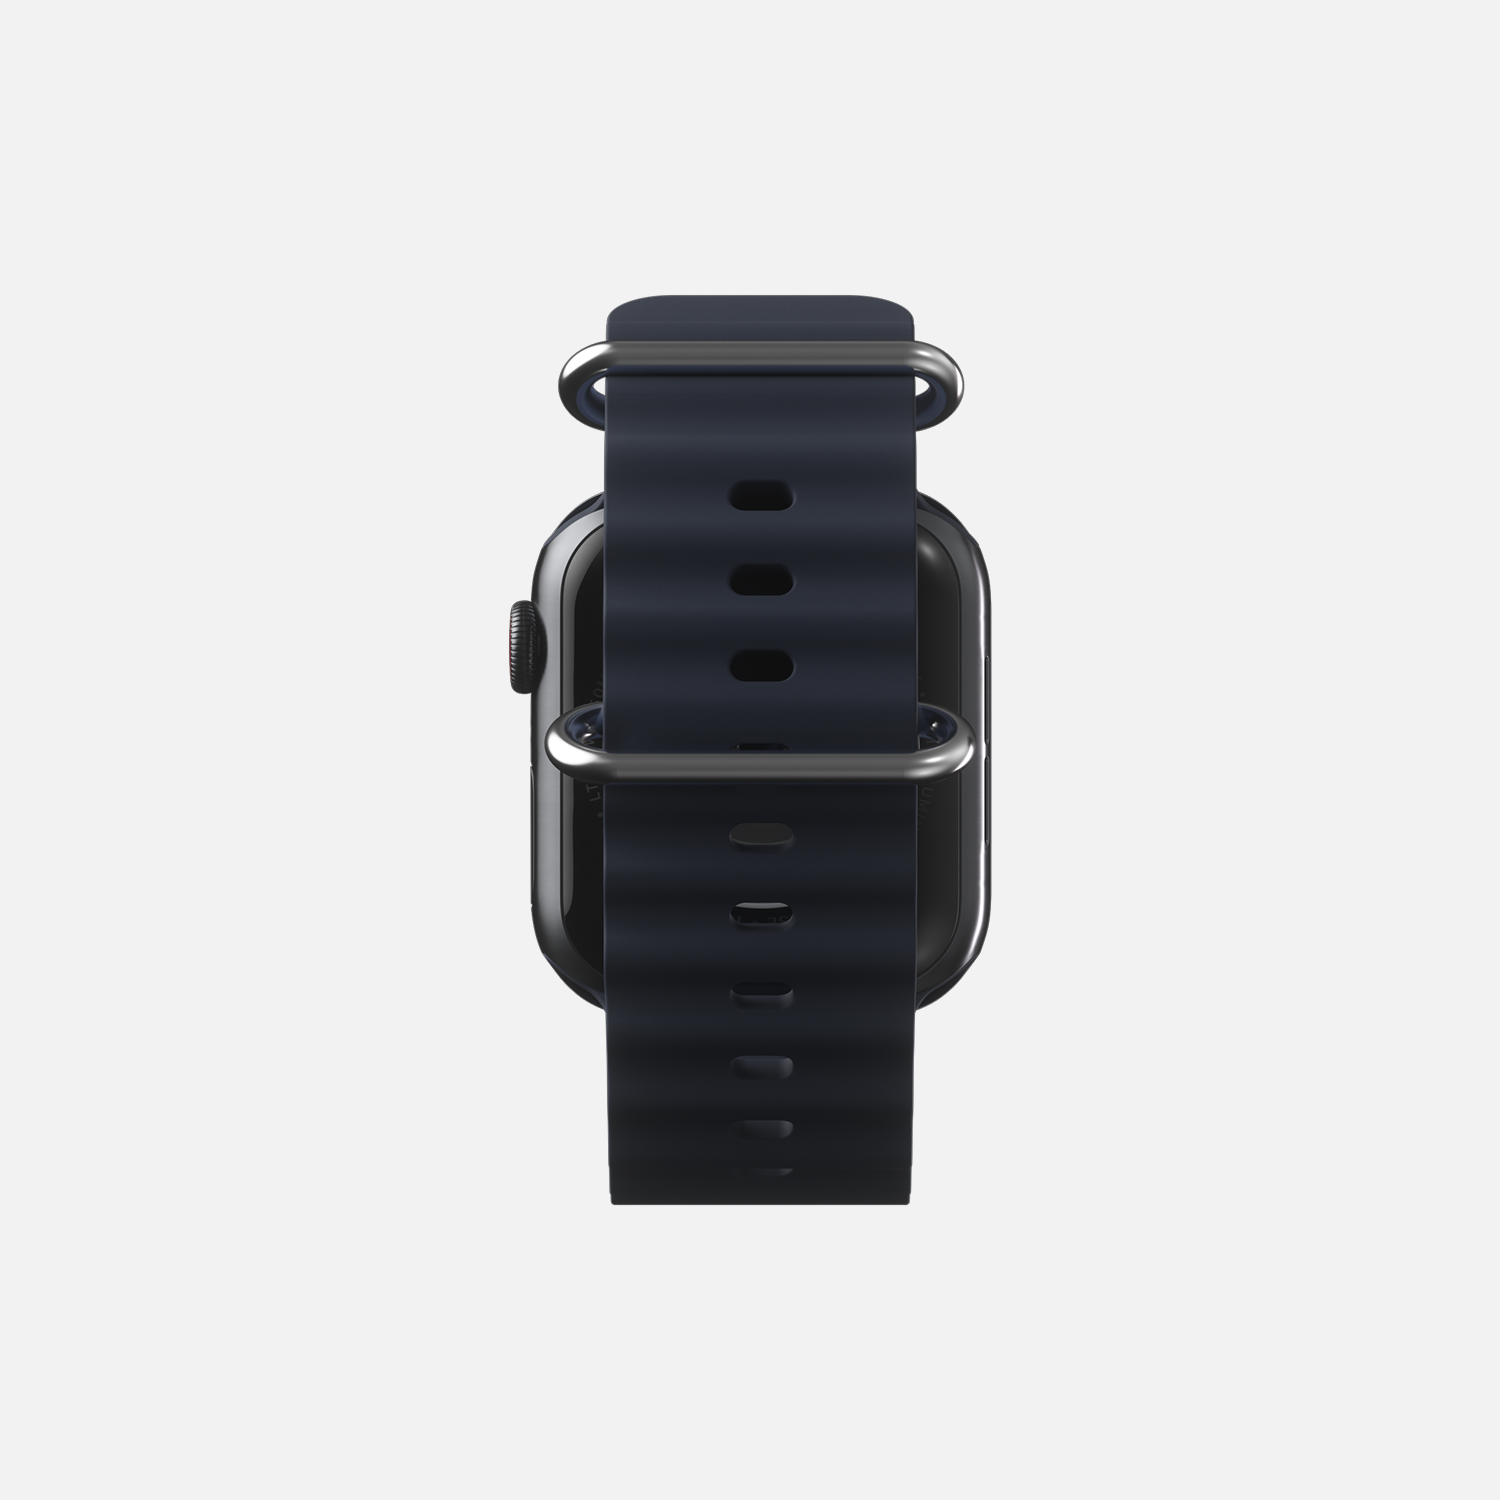 Rear view of a modern smartwatch for Apple watch with black sport band isolated on white background"